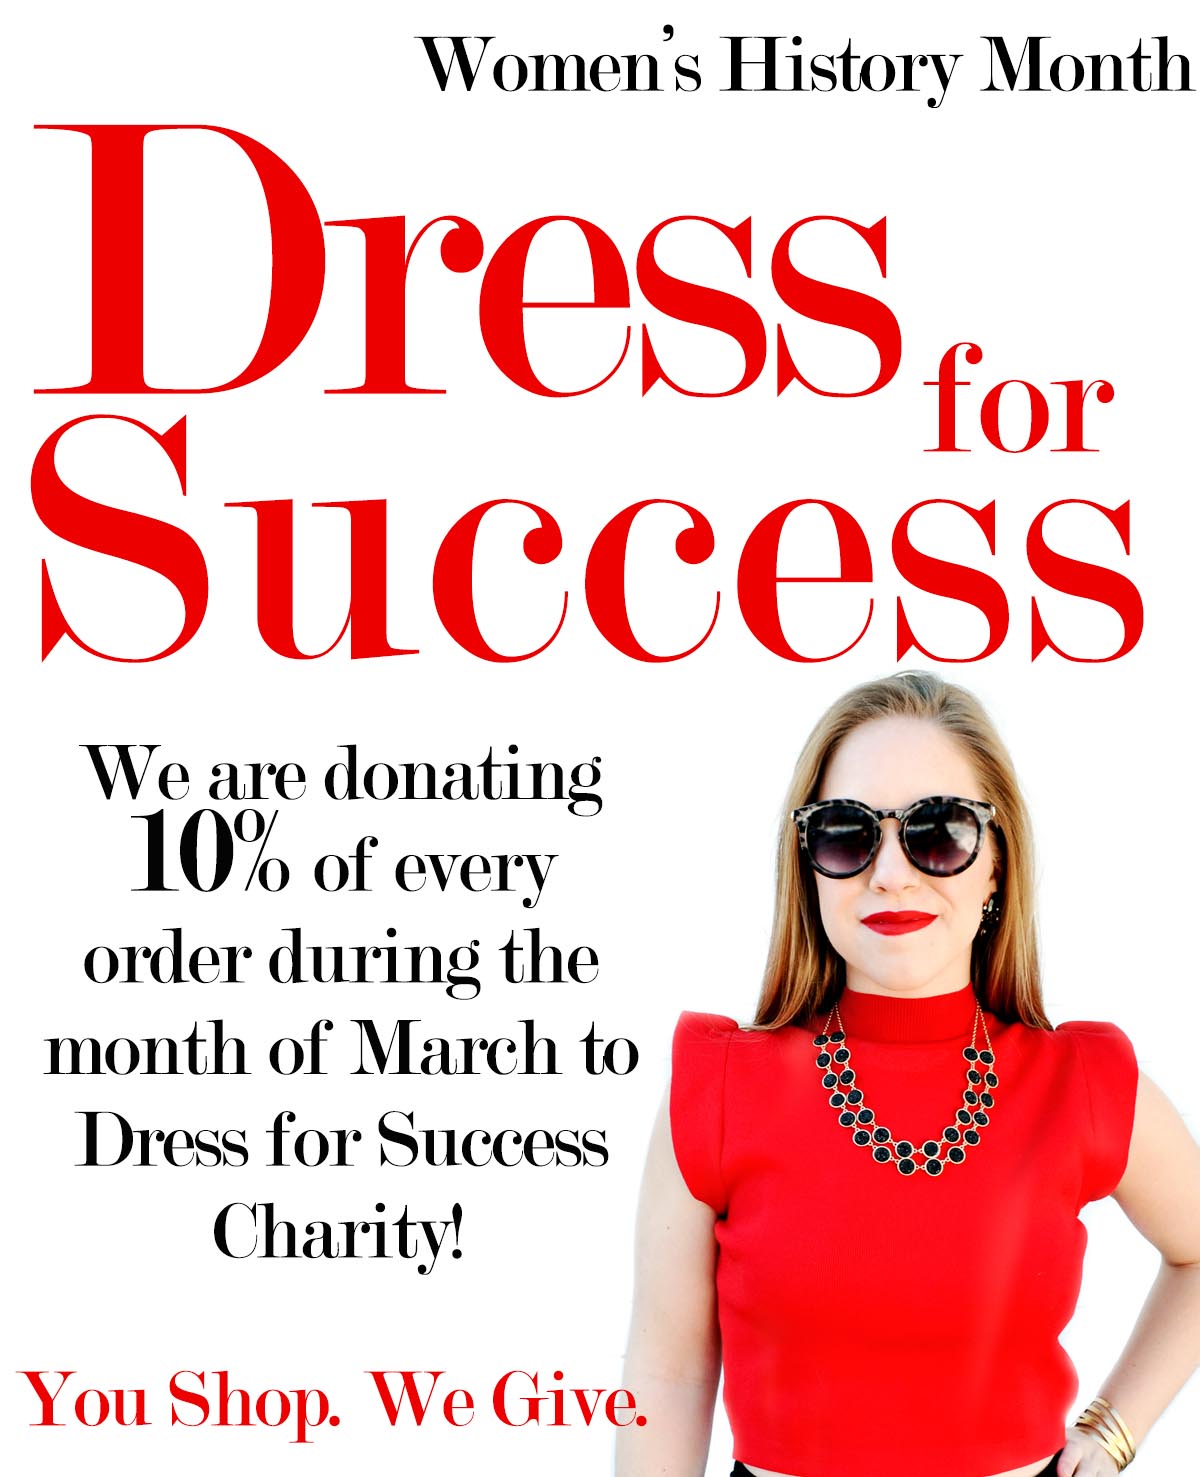 How We Support Dress For Success Charity During Women's History Month